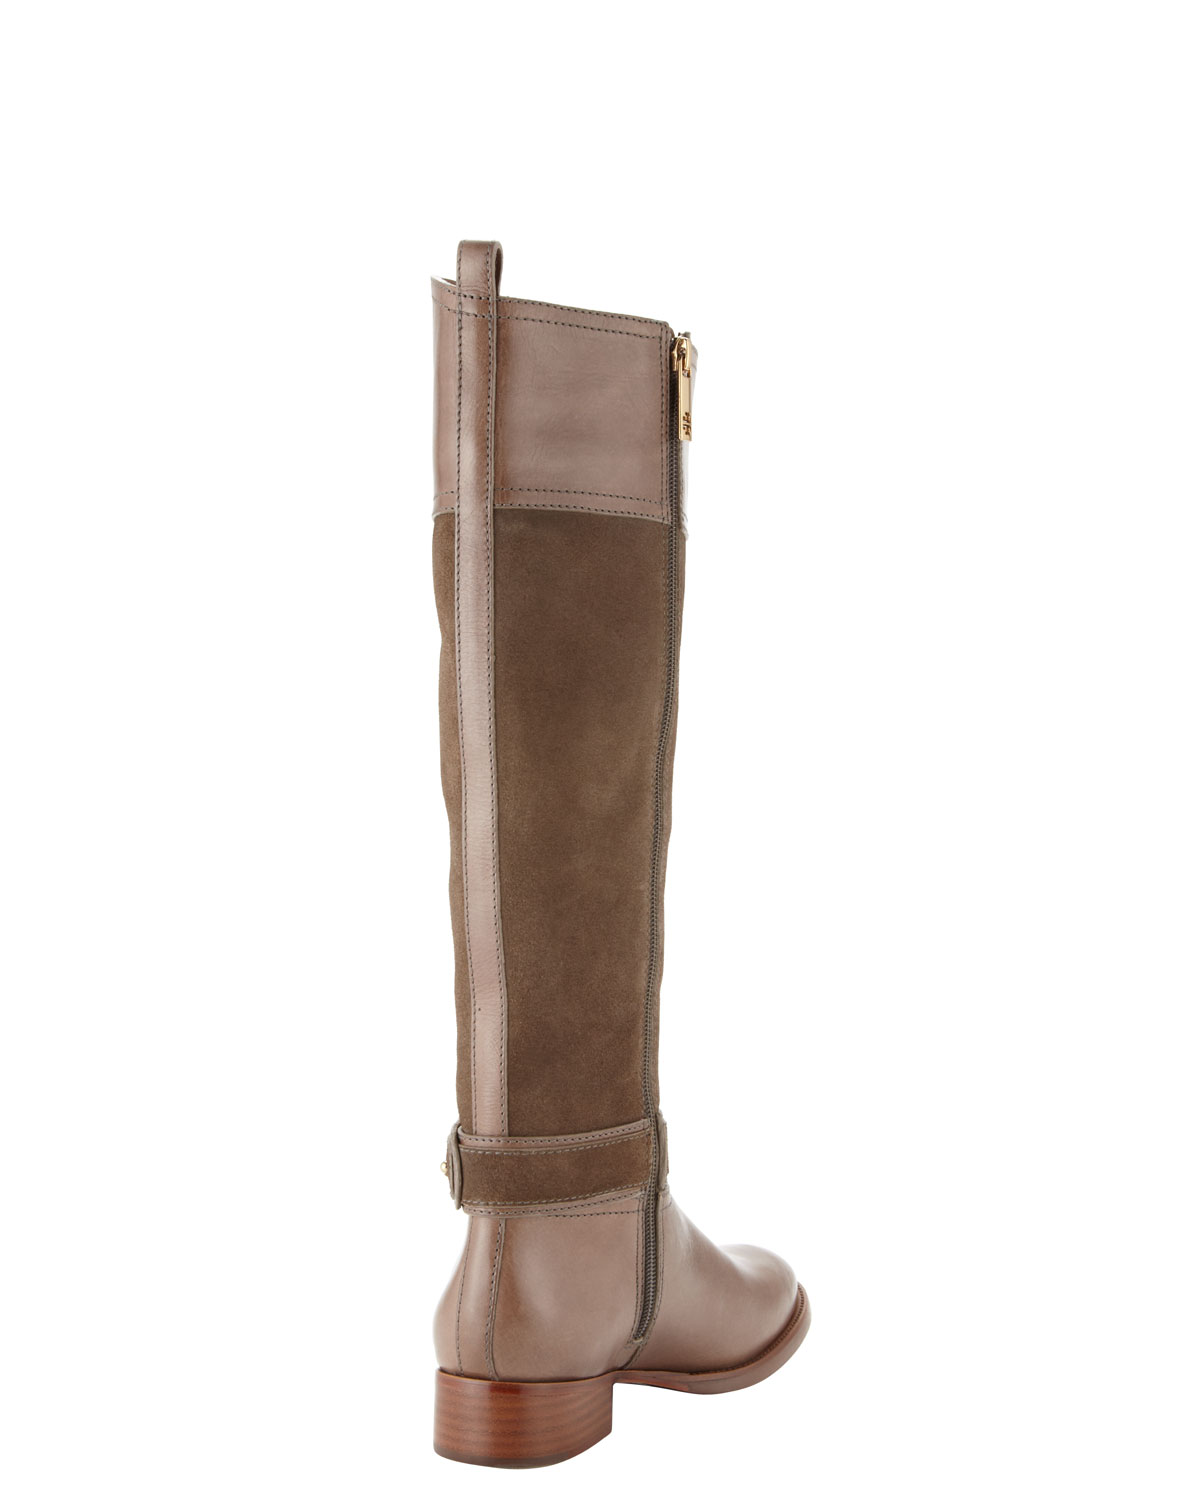 Tory burch Tenley Suede Leather Riding Boot in Brown | Lyst